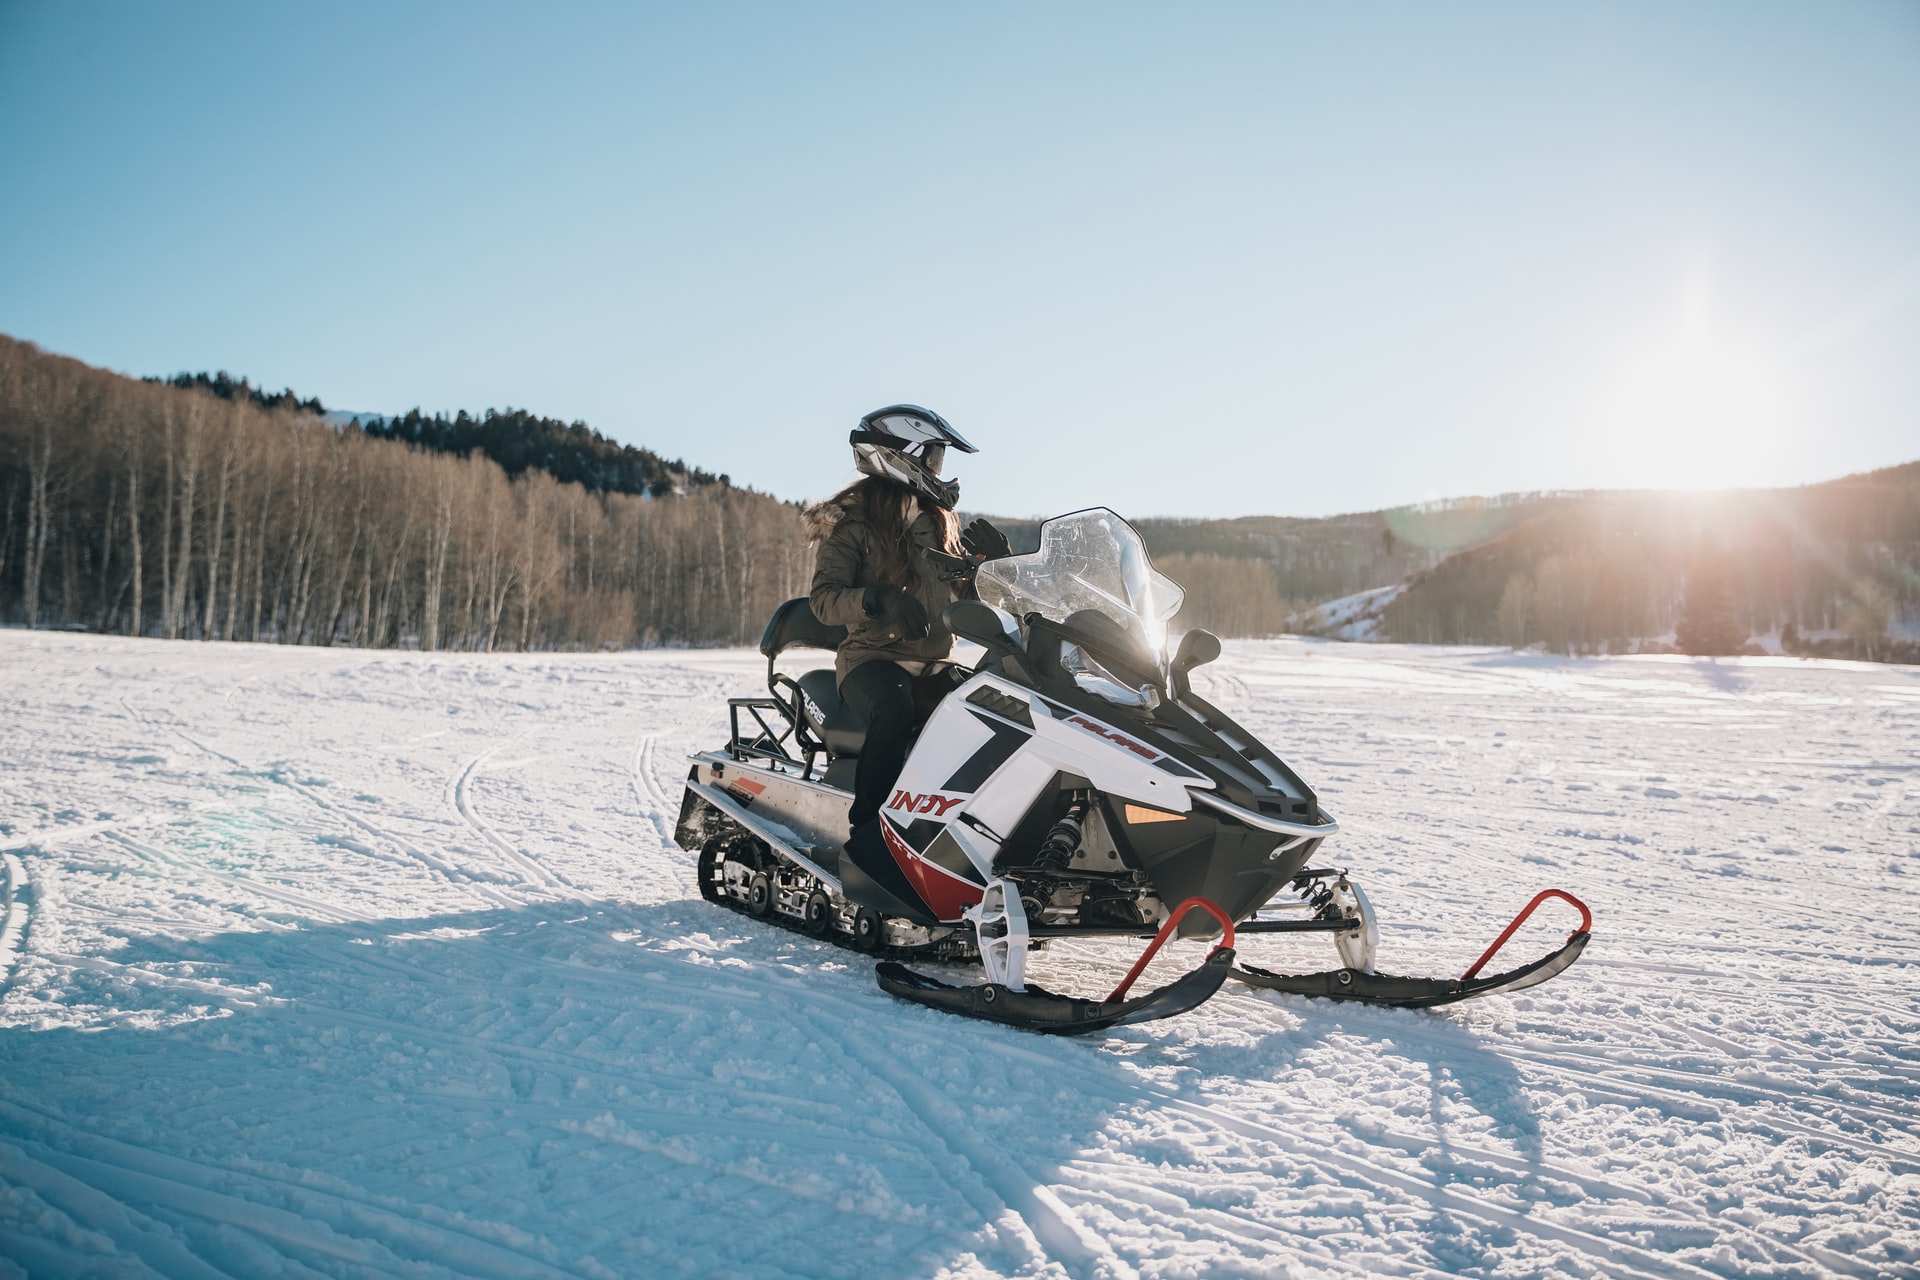 Best Snowmobile Brands: Which One Should You Choose?